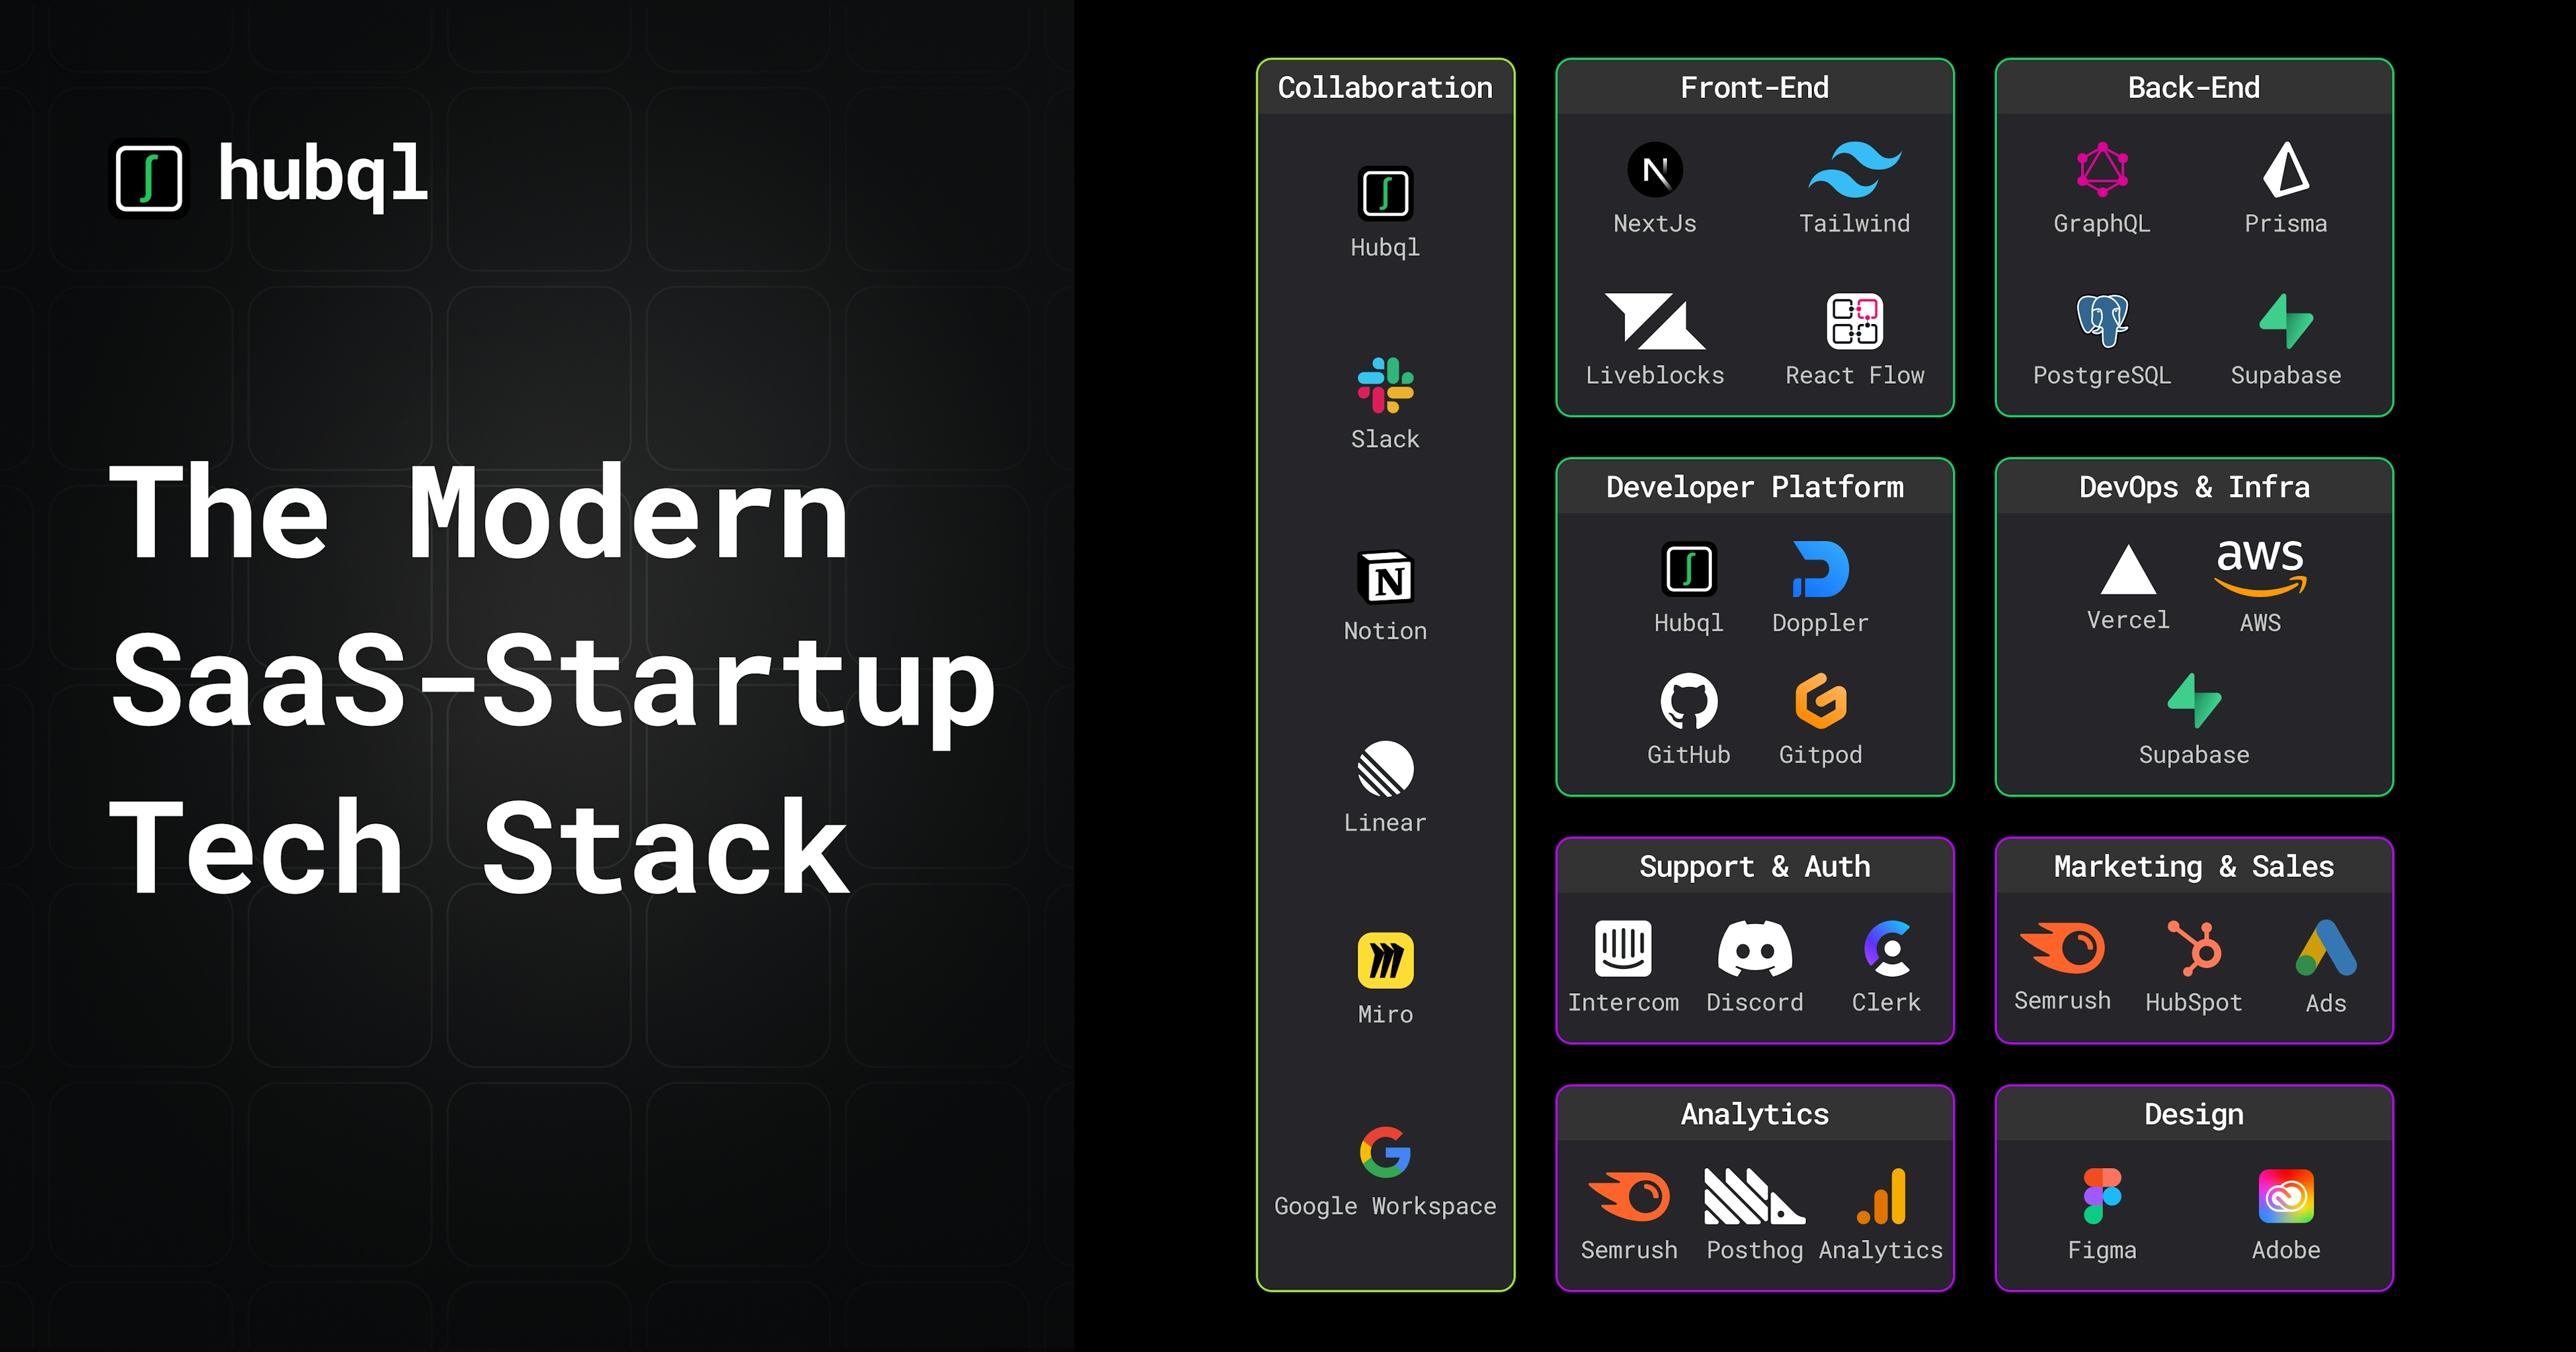 The modern SaaS-Startup Tech Stack